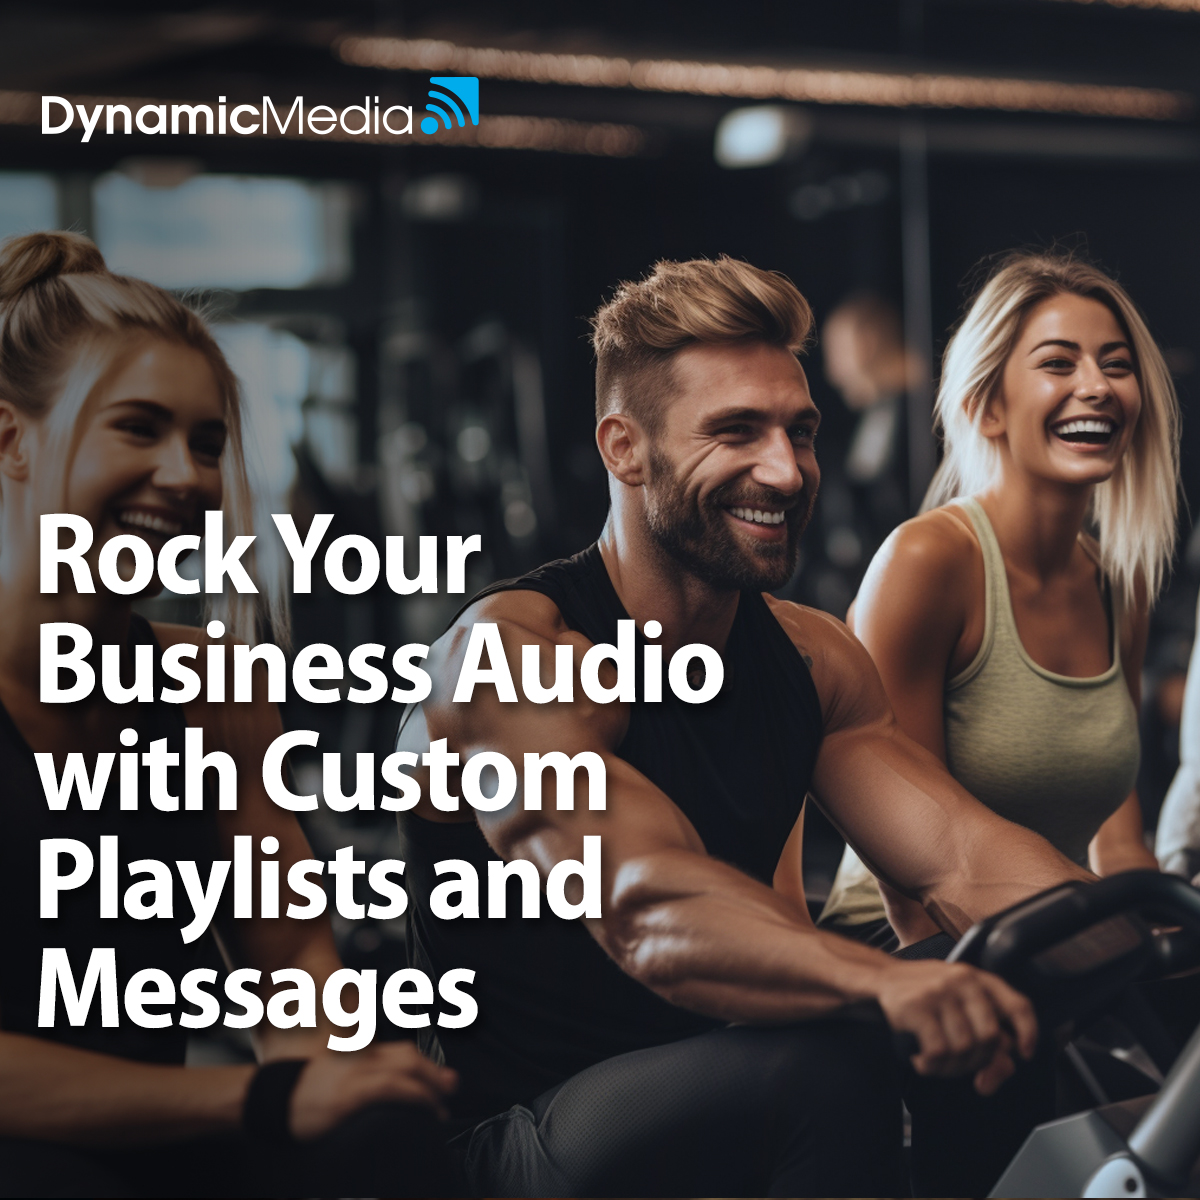 Elevate Your Business Audio with Spot-On Playlists and Impactful Messages! Stand out connect with your audience on a whole new level. Pumped and ready to revolutionize your audio marketing? #ChangeTheGame #AudioMarketing #ImpactStory #AuthenticMusic 
zurl.co/ASQZ